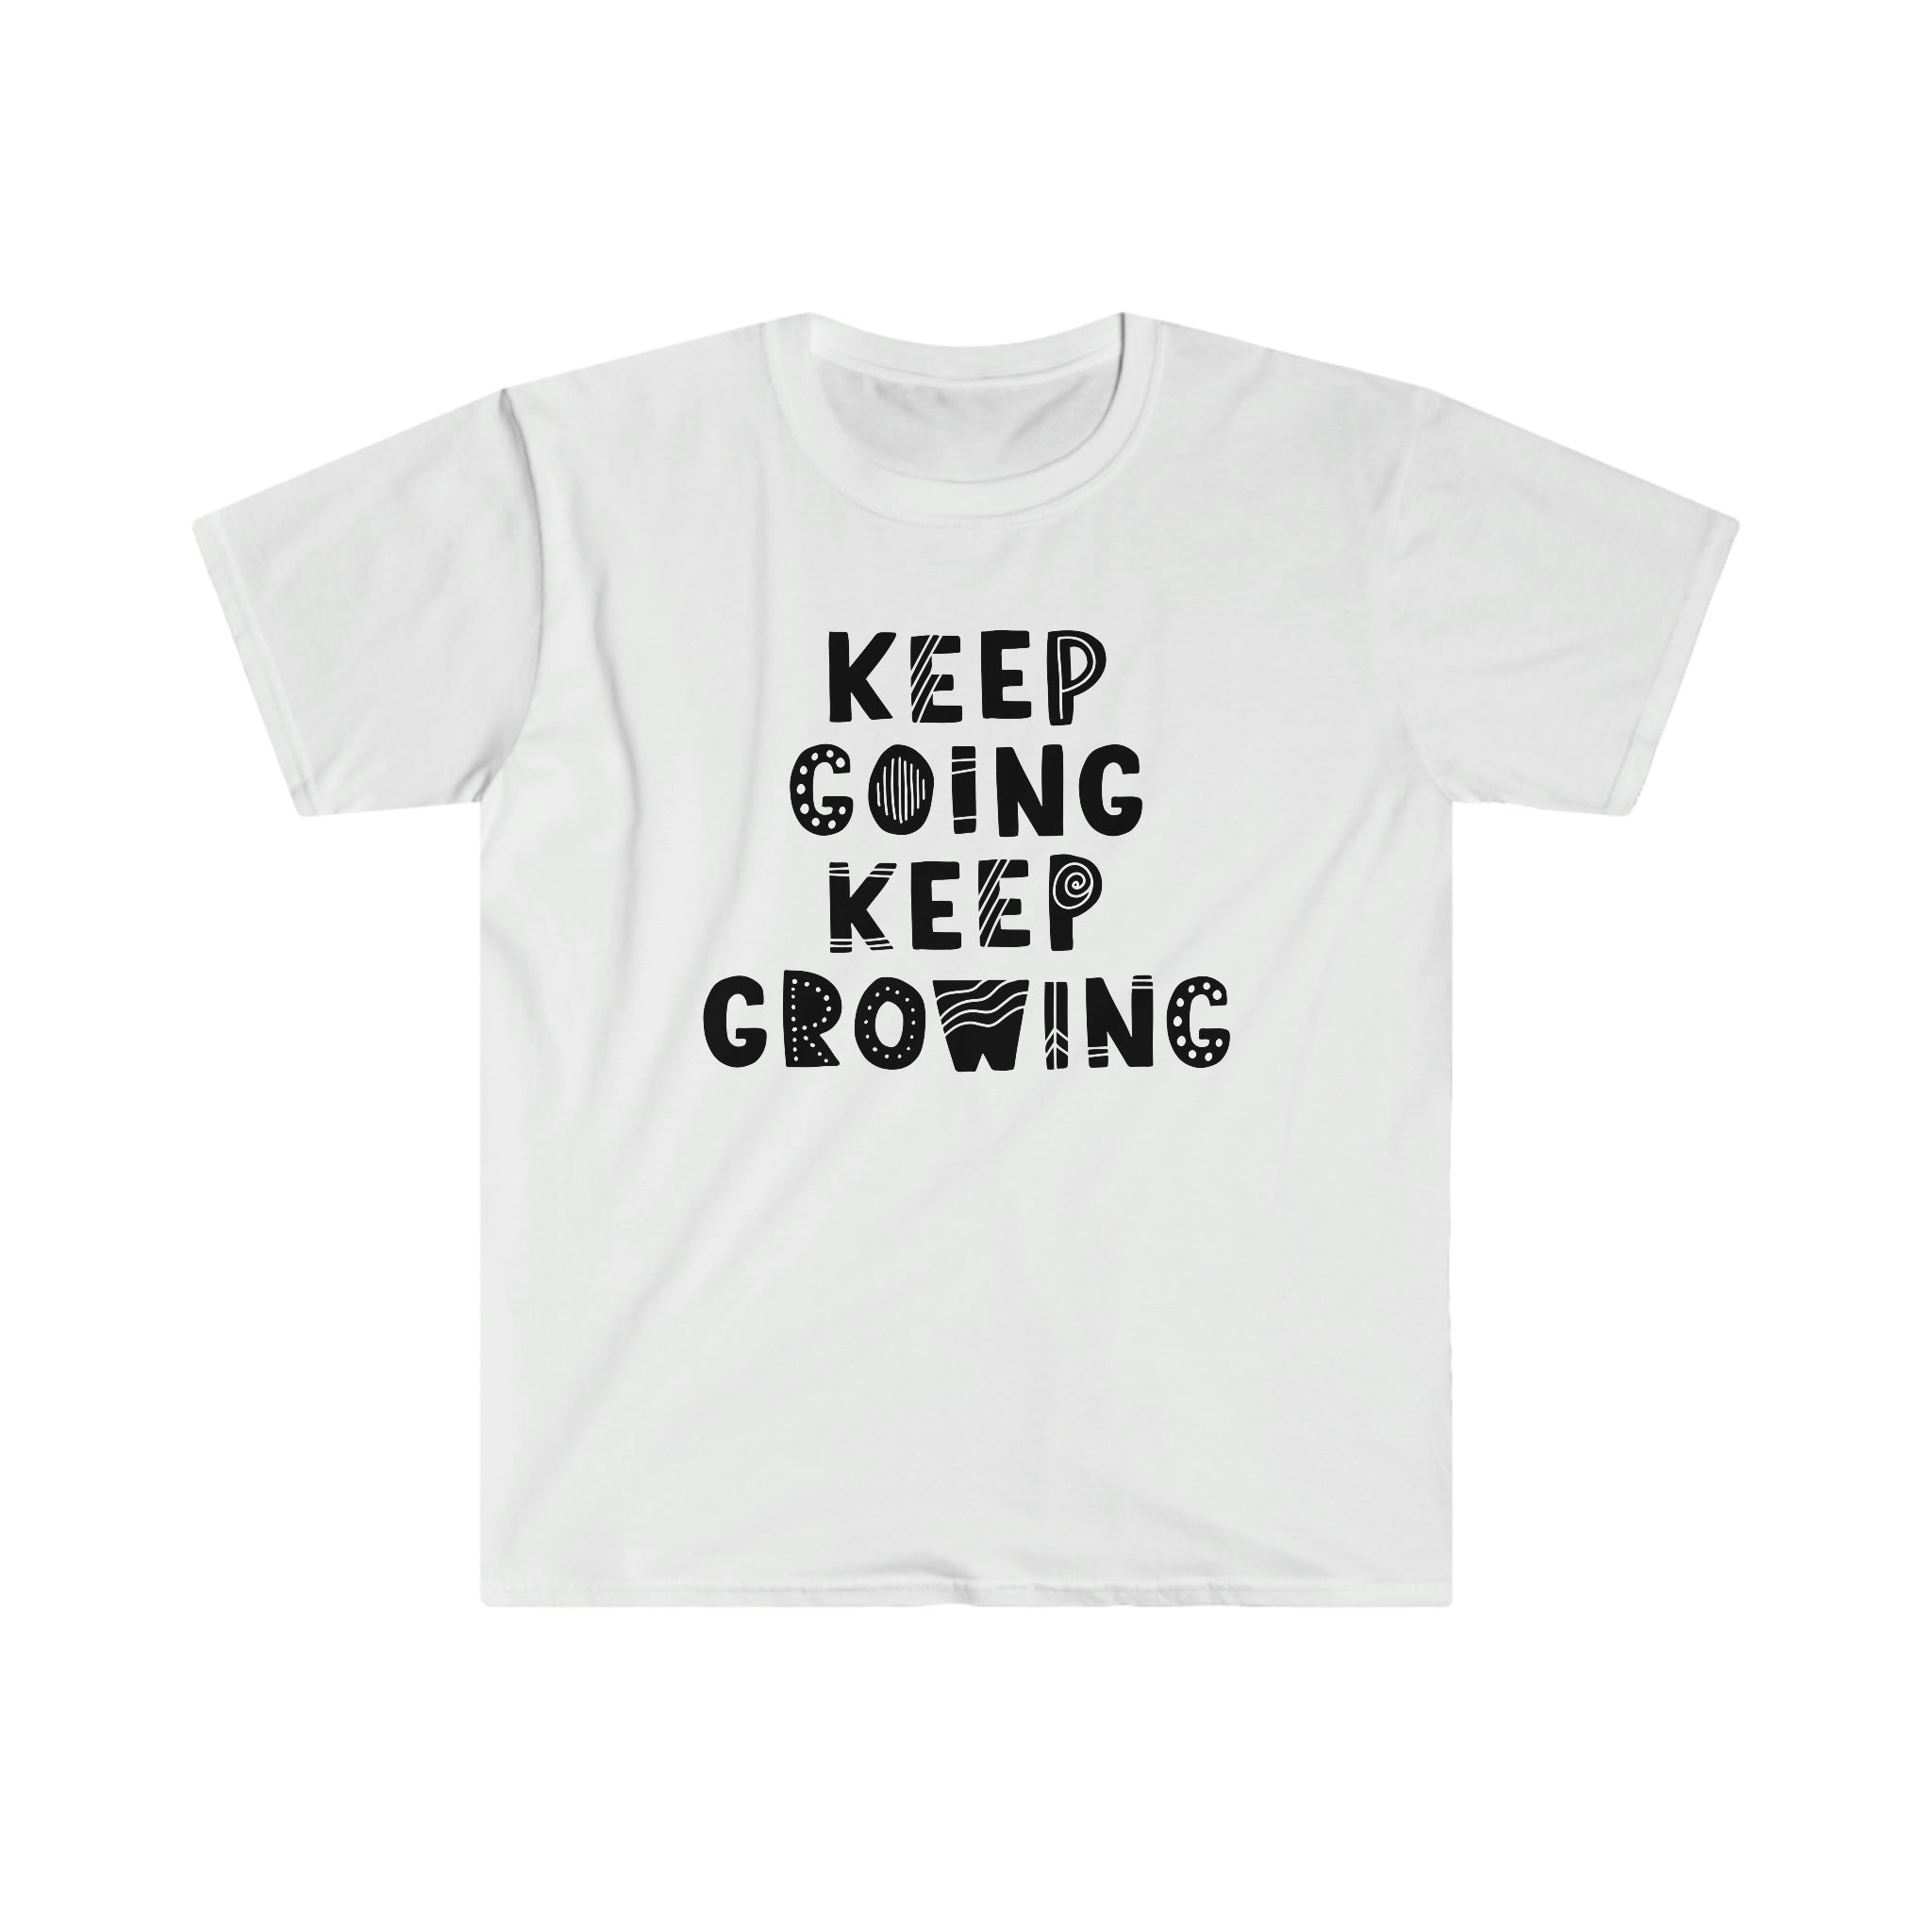 This Keep Going, Keep Growing T-Shirt features the motivational message "Keep Going, Keep Growing.